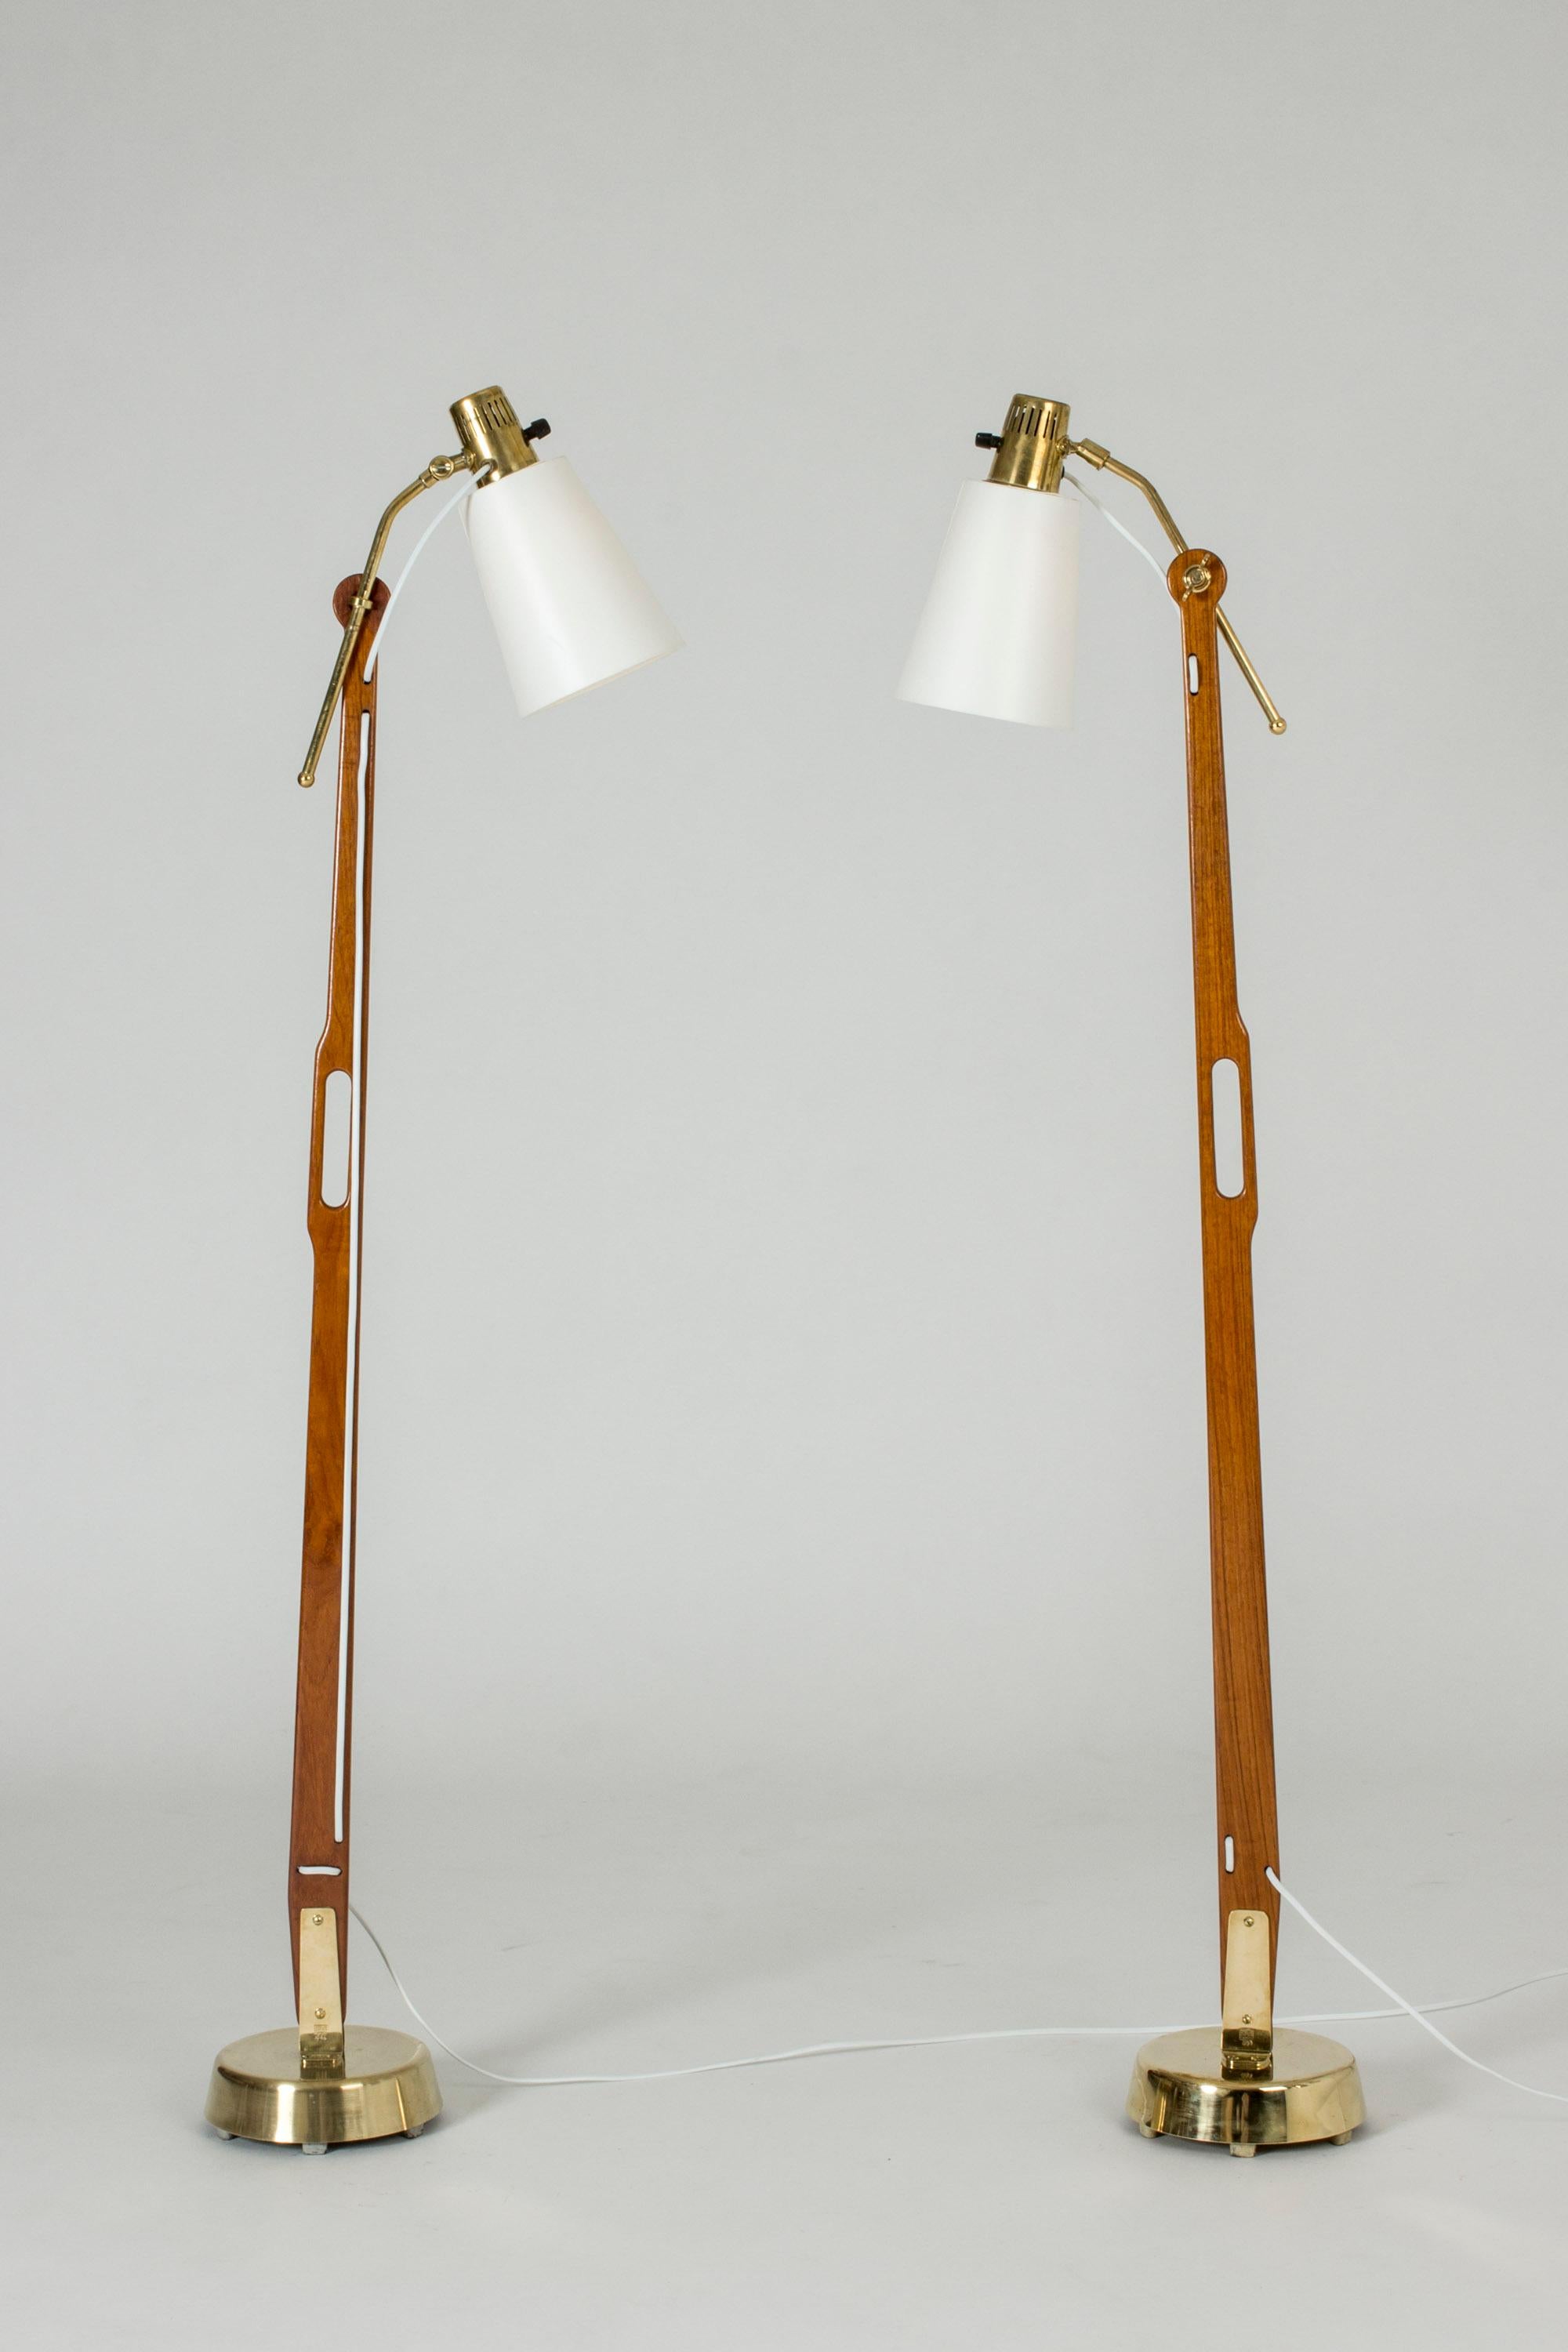 Pair of amazing teak and brass floor lamps by Hans Bergström, with wonderful attention to detail and functionality. The lamp shades can be adjusted in different angles and at different distances from the pole. Handles crafted in the teak, making the